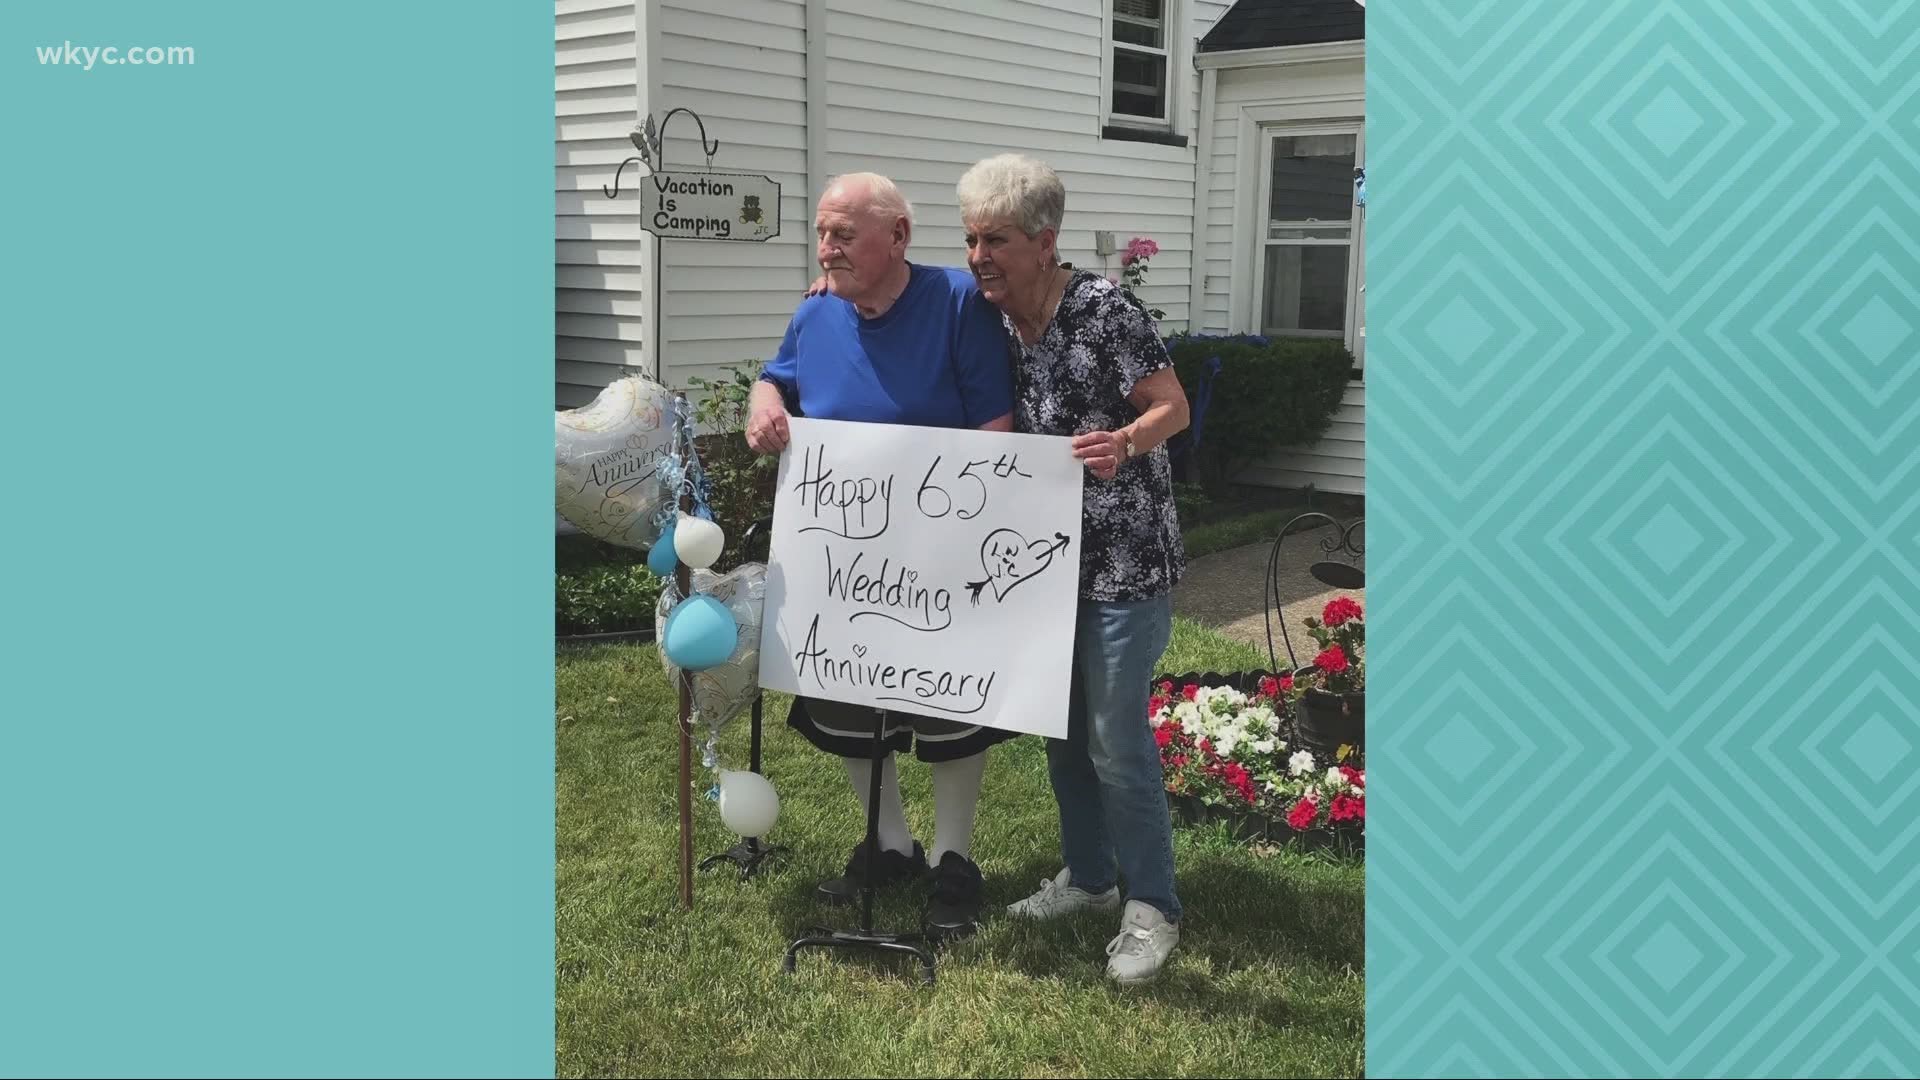 Imagine being married for 65 years! Jay Crawford's mother's first cousin Jim Centorbi has been married to his lovely bride Lucy for 65 years.